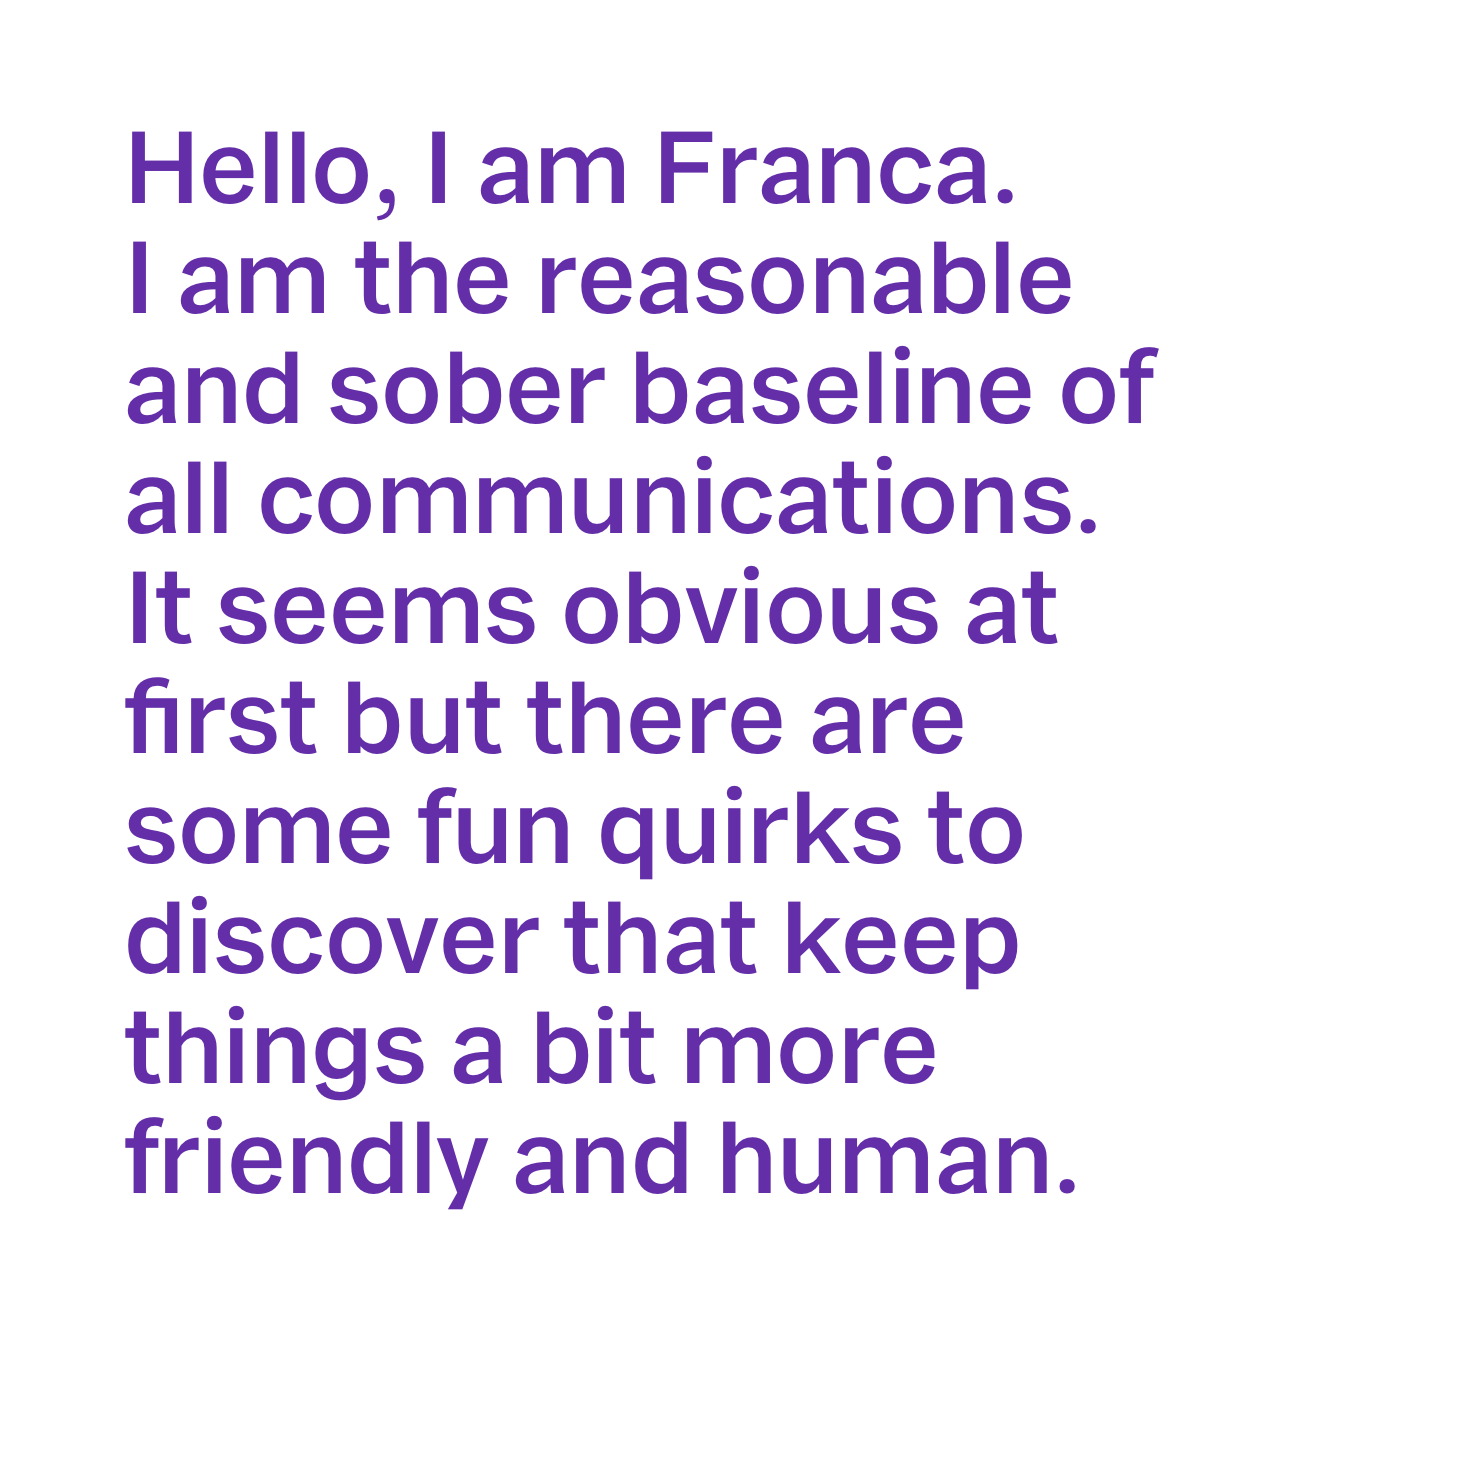 A white background with purple text “Hello, I am Franca. I am the reasonable and sober baseline of all communications. It seems obvious at first but there are some fun quirks to discover that keep things a bit more friendly and human. ”